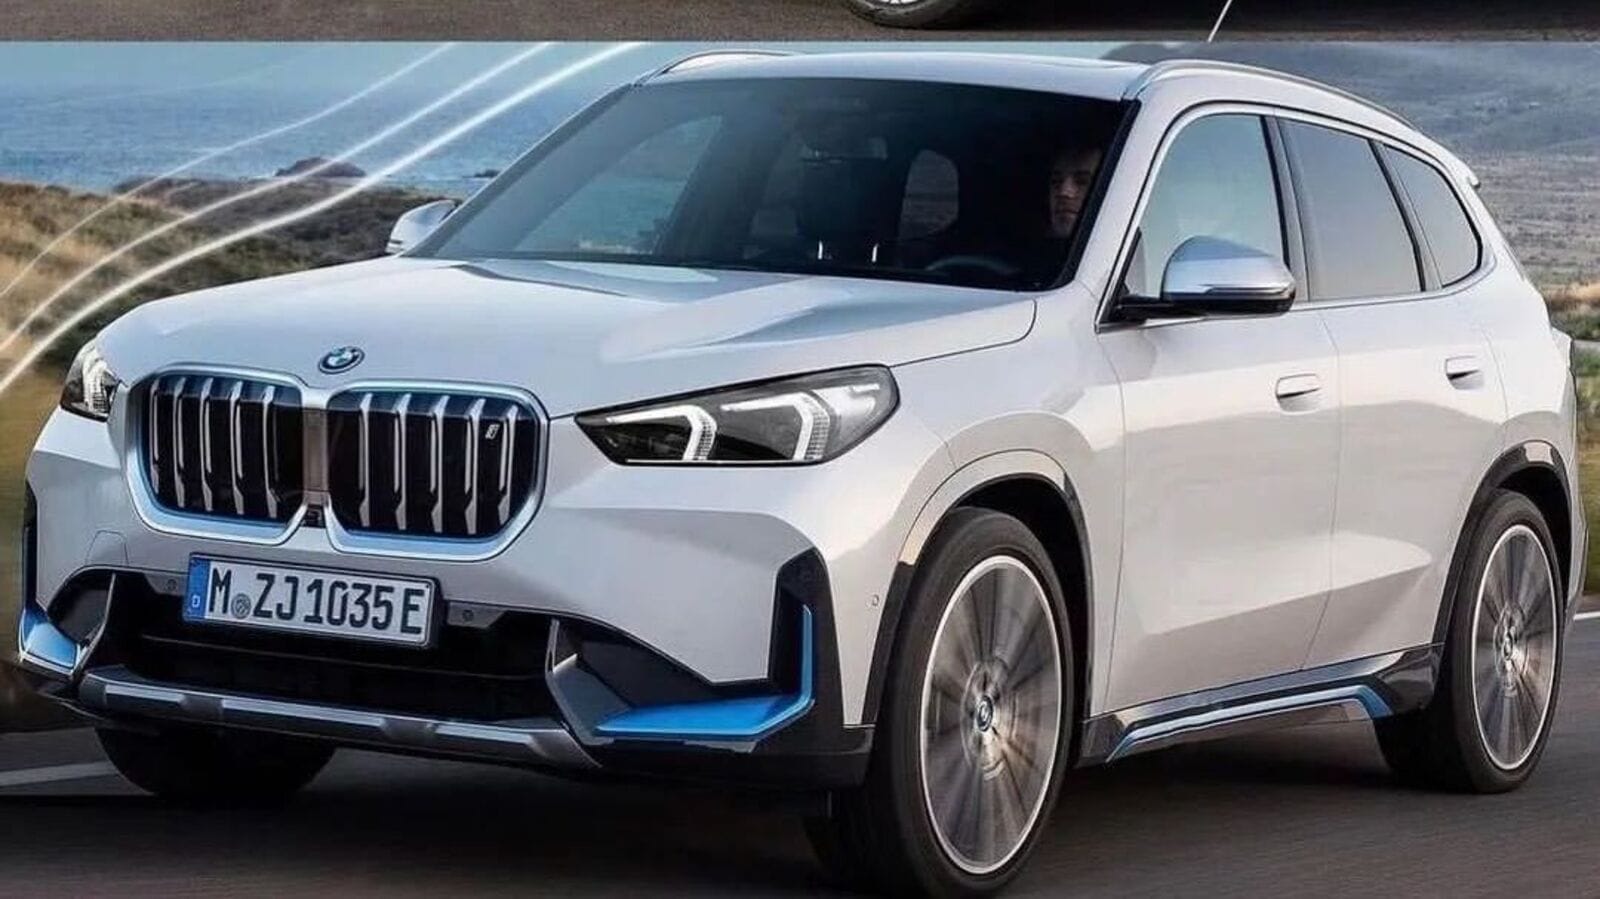 BMW iX1 electric SUV looks and features leaked ahead of global debut